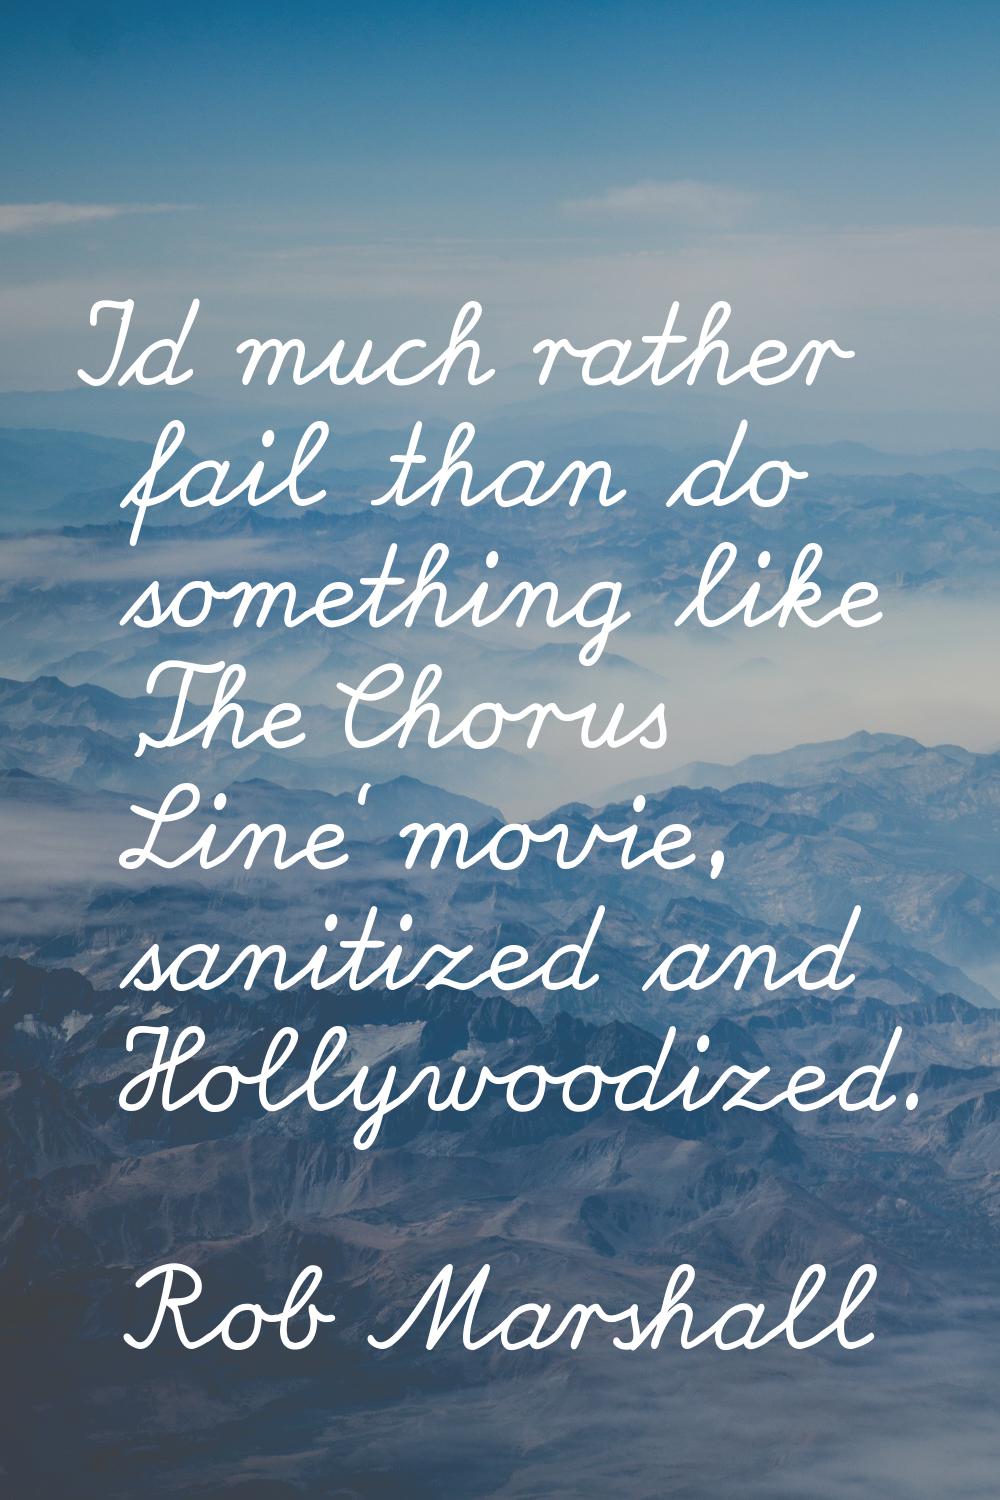 I'd much rather fail than do something like 'The Chorus Line' movie, sanitized and Hollywoodized.